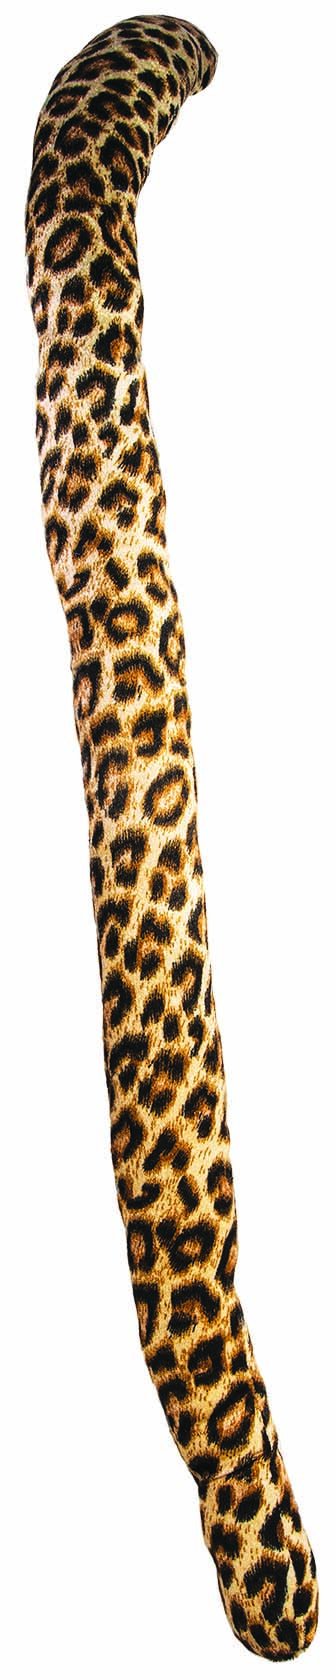 Leopard tail approx. 23